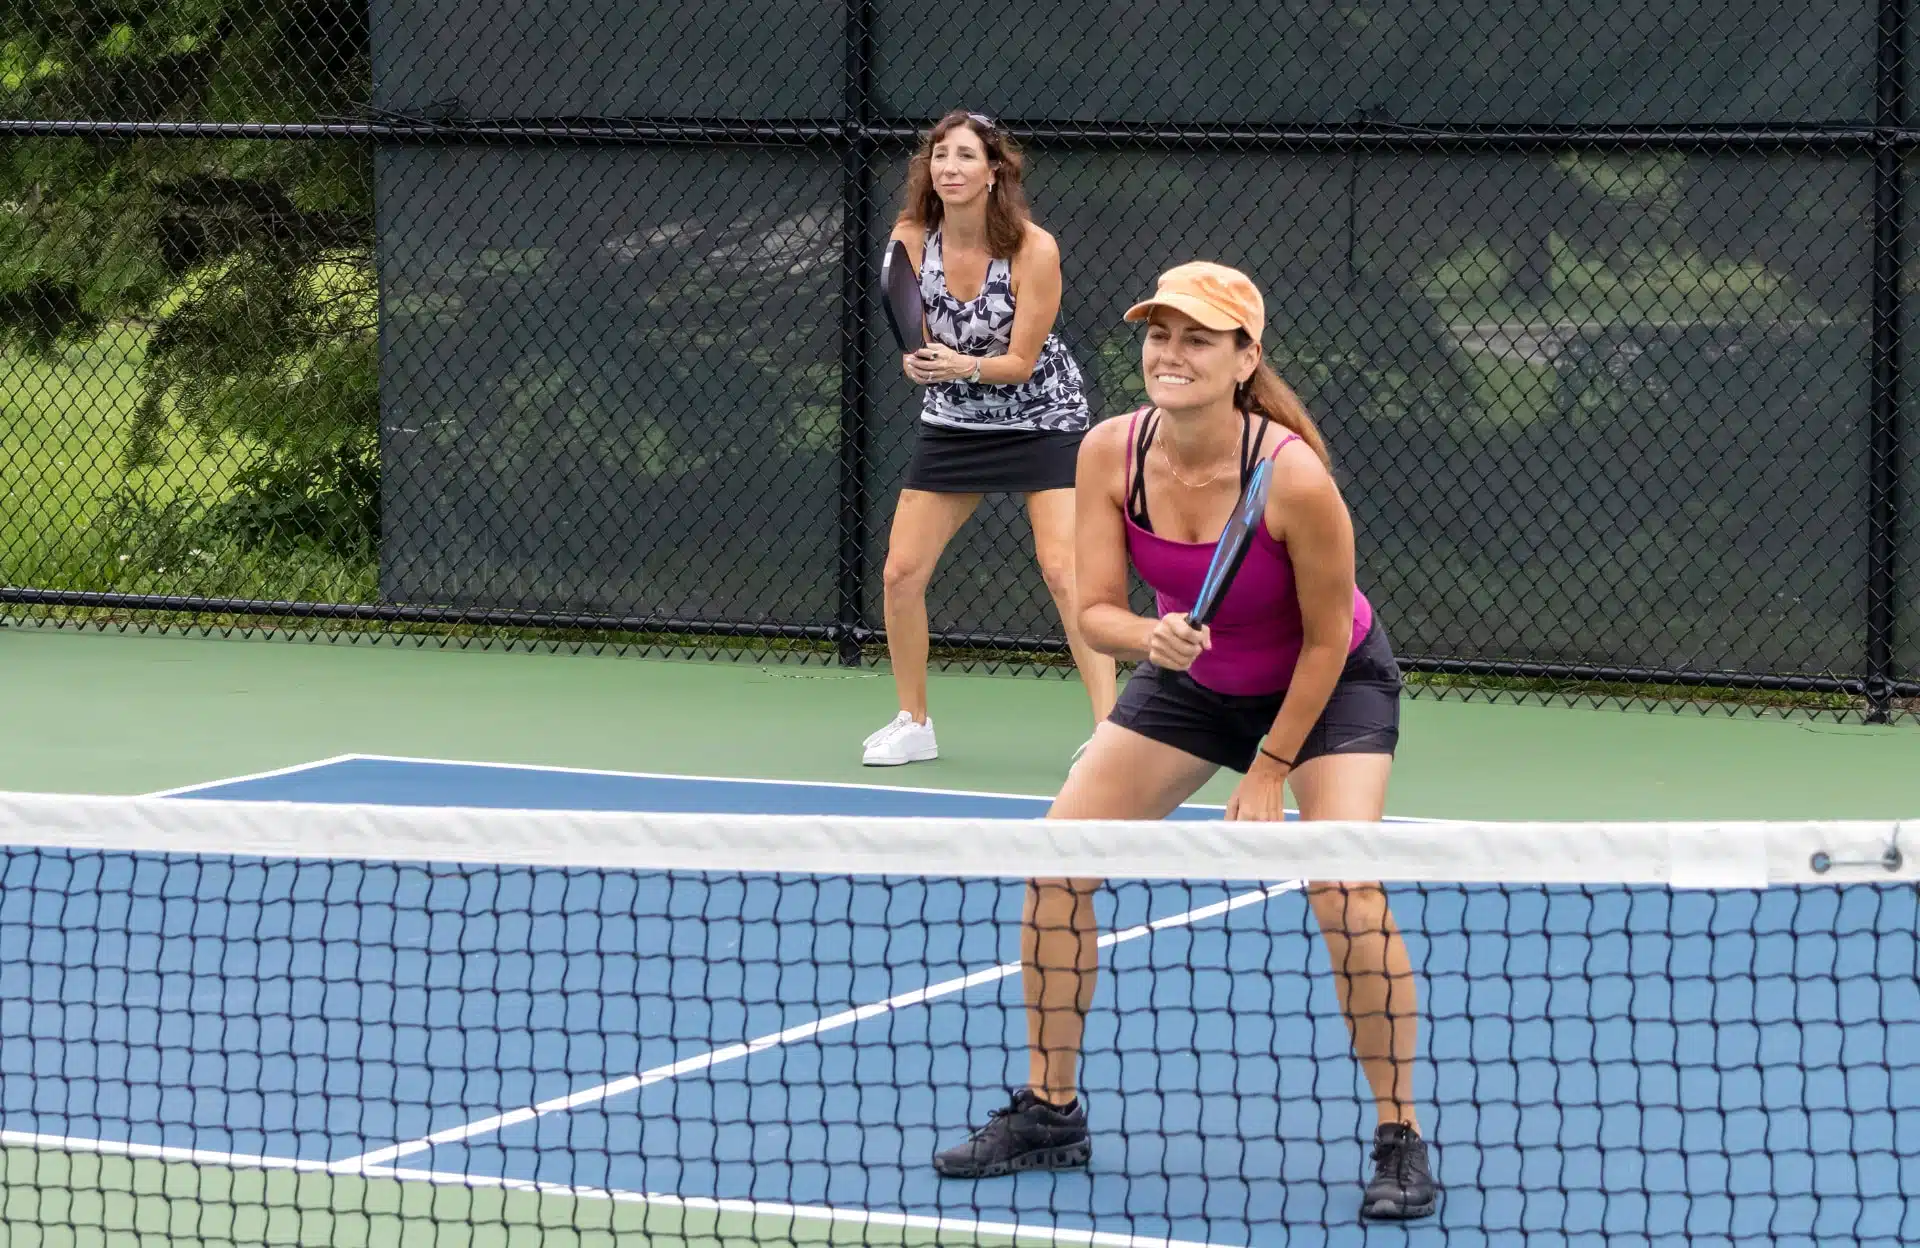 Top 10 Pickleball Tips for Beginners to Improve Your Game